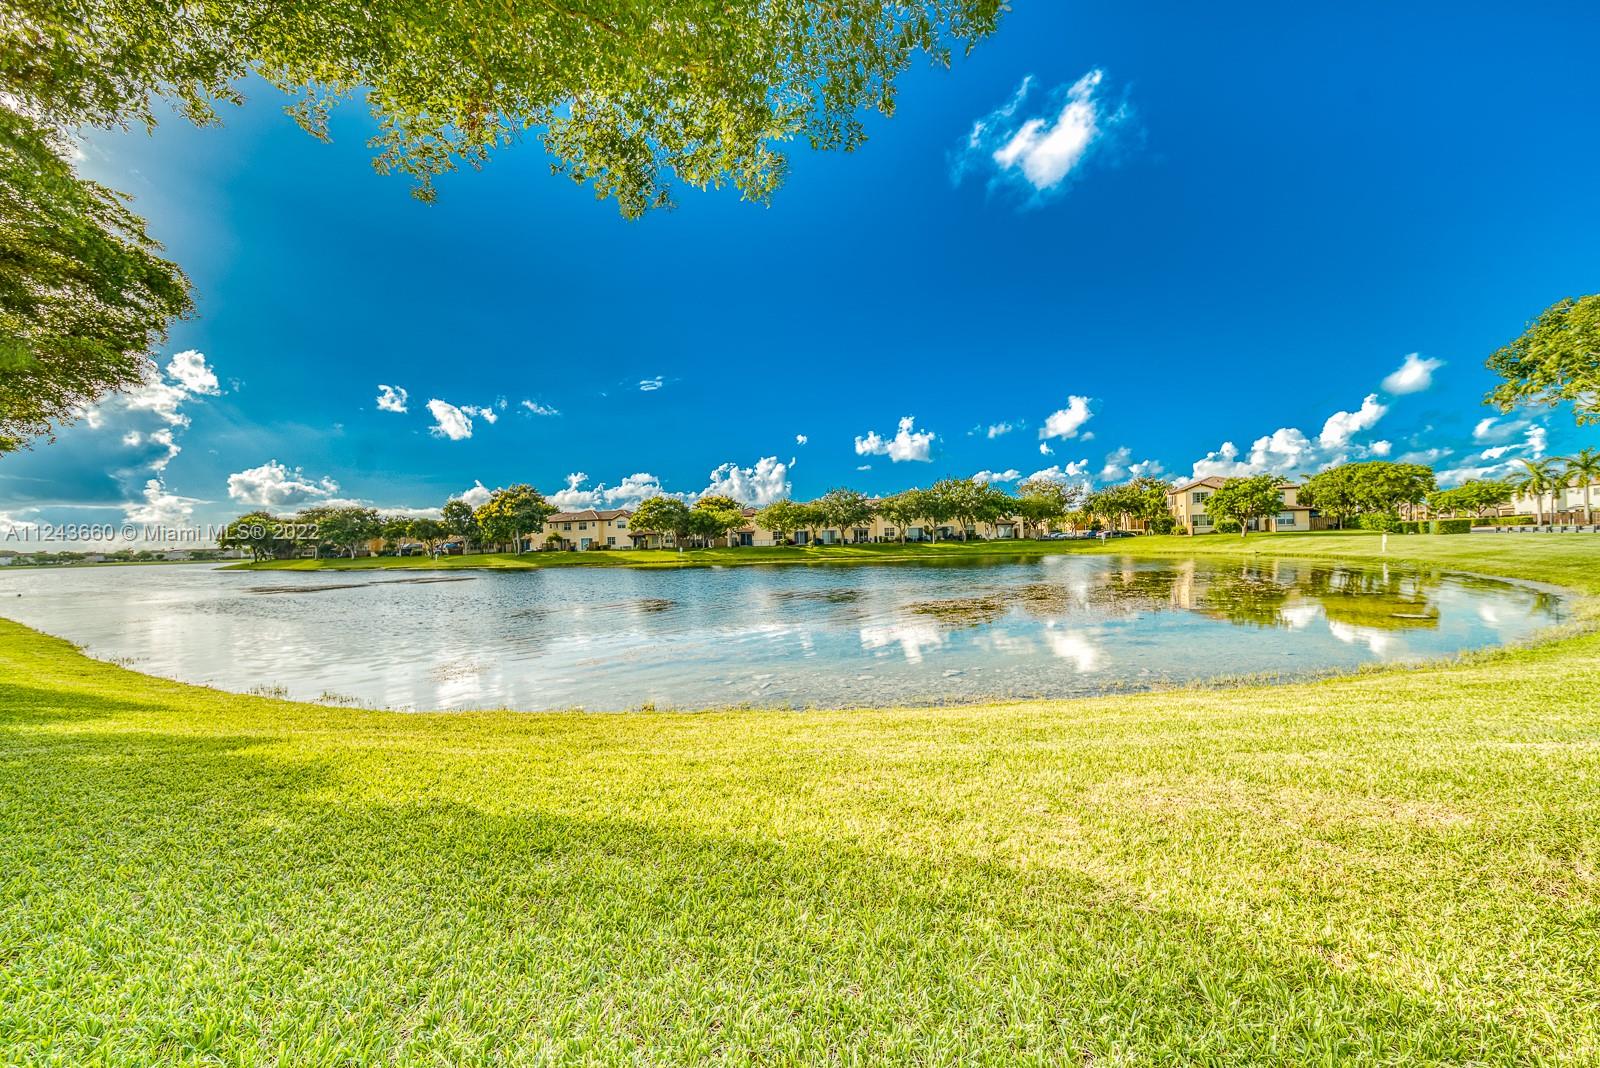 Beautiful 3 Bed 3 Bath lake front Townhome in The Waterway community of Isles at Bayshore in Cutler Bay. Tile floors through out the first floor, carpet on stairs and second floor hallways, laminate flooring in all bedrooms. This wonderful gated community features a resort style clubhouse with swimming pool, Jacuzzi, clubhouse, kids playroom, gym, and dog park. Minutes away from Blackpoint Marina, Turnpike, and more.